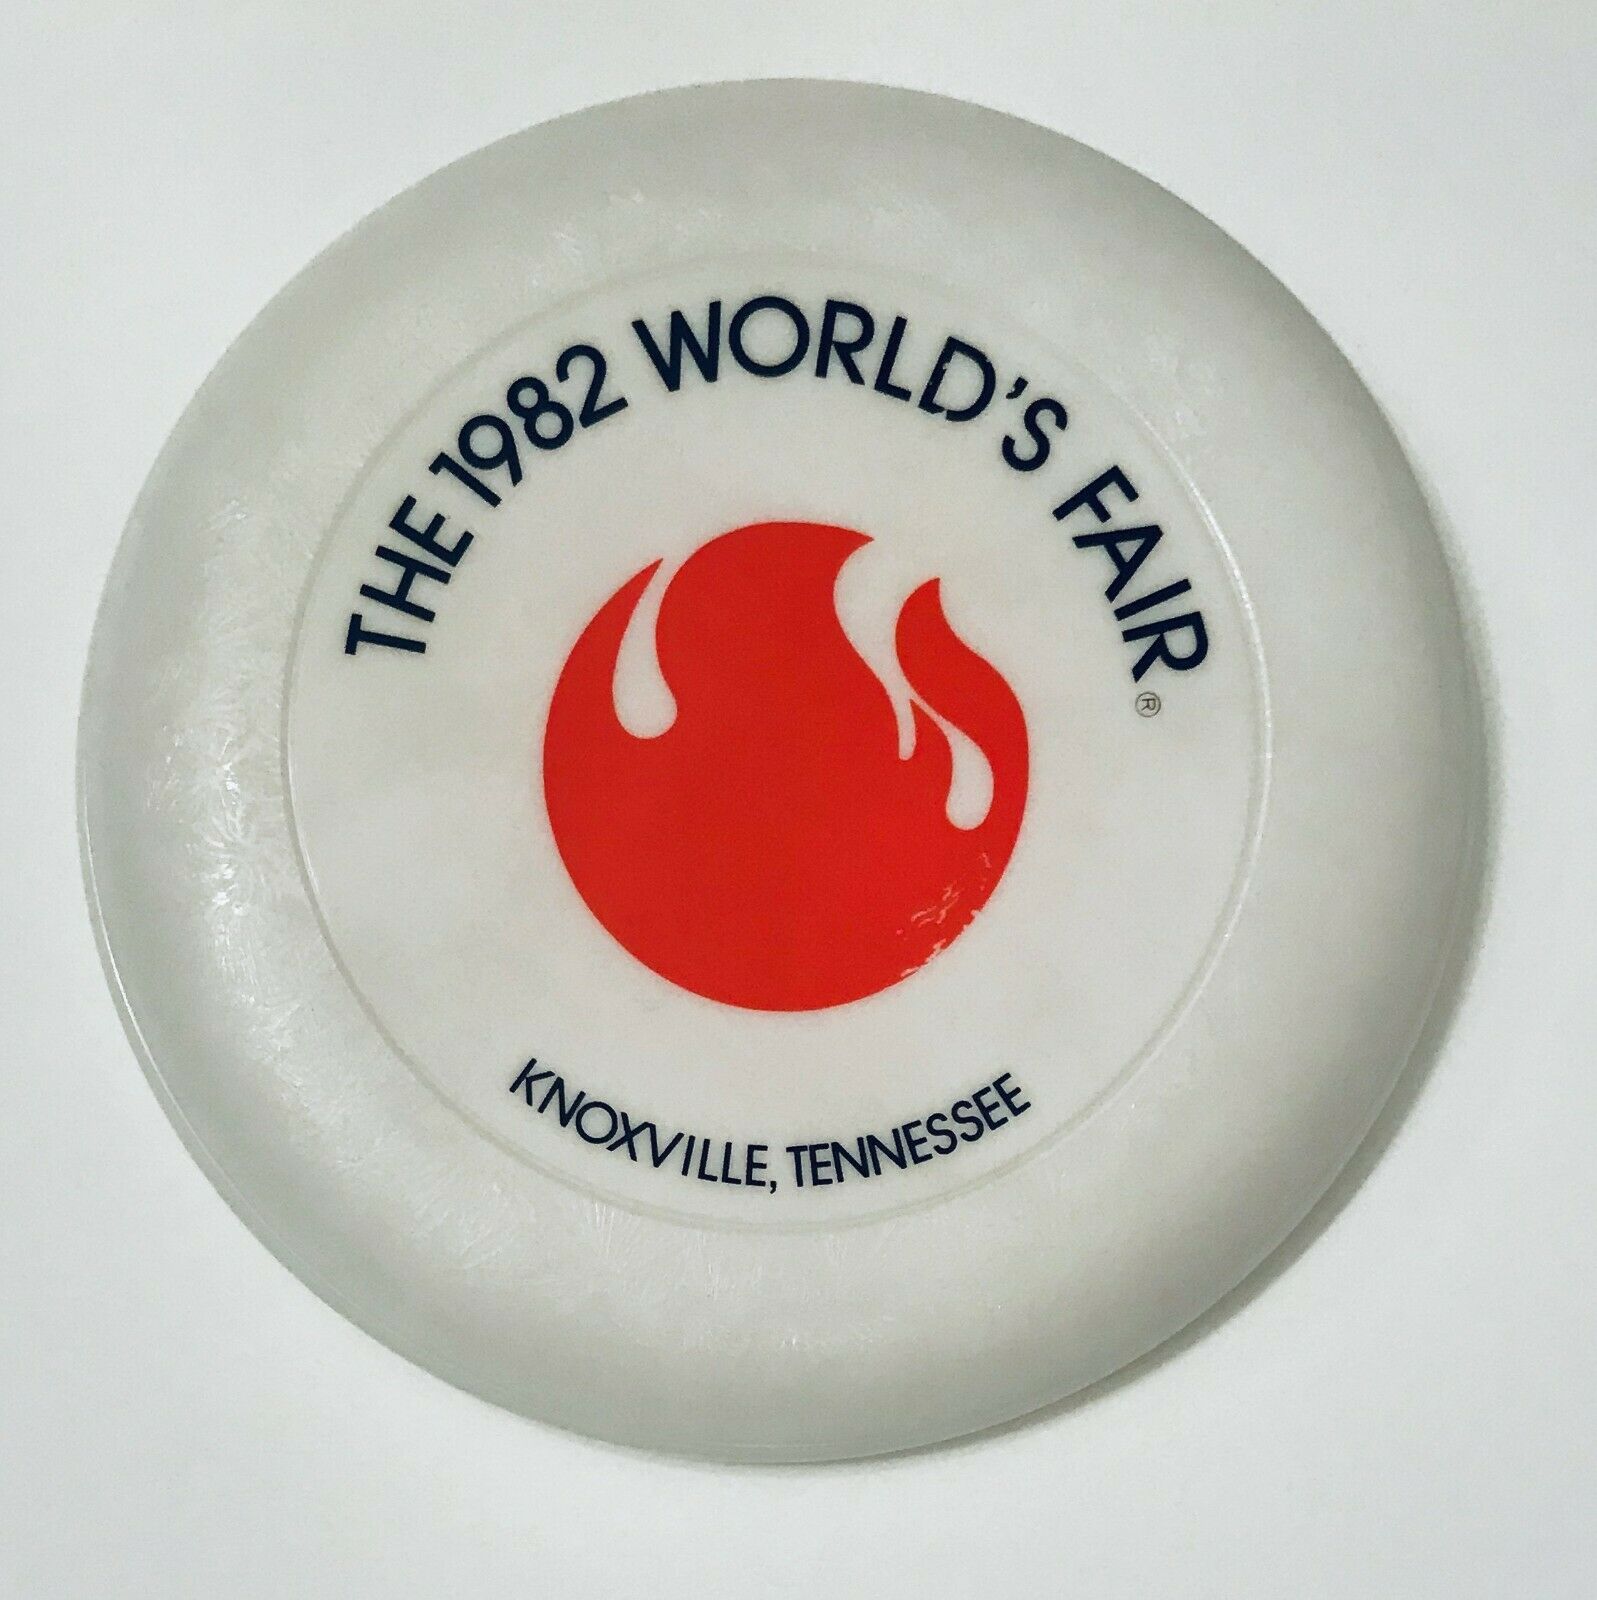 Vintage Frisbee - 1982 Worlds Fair - Knoxville Tennessee